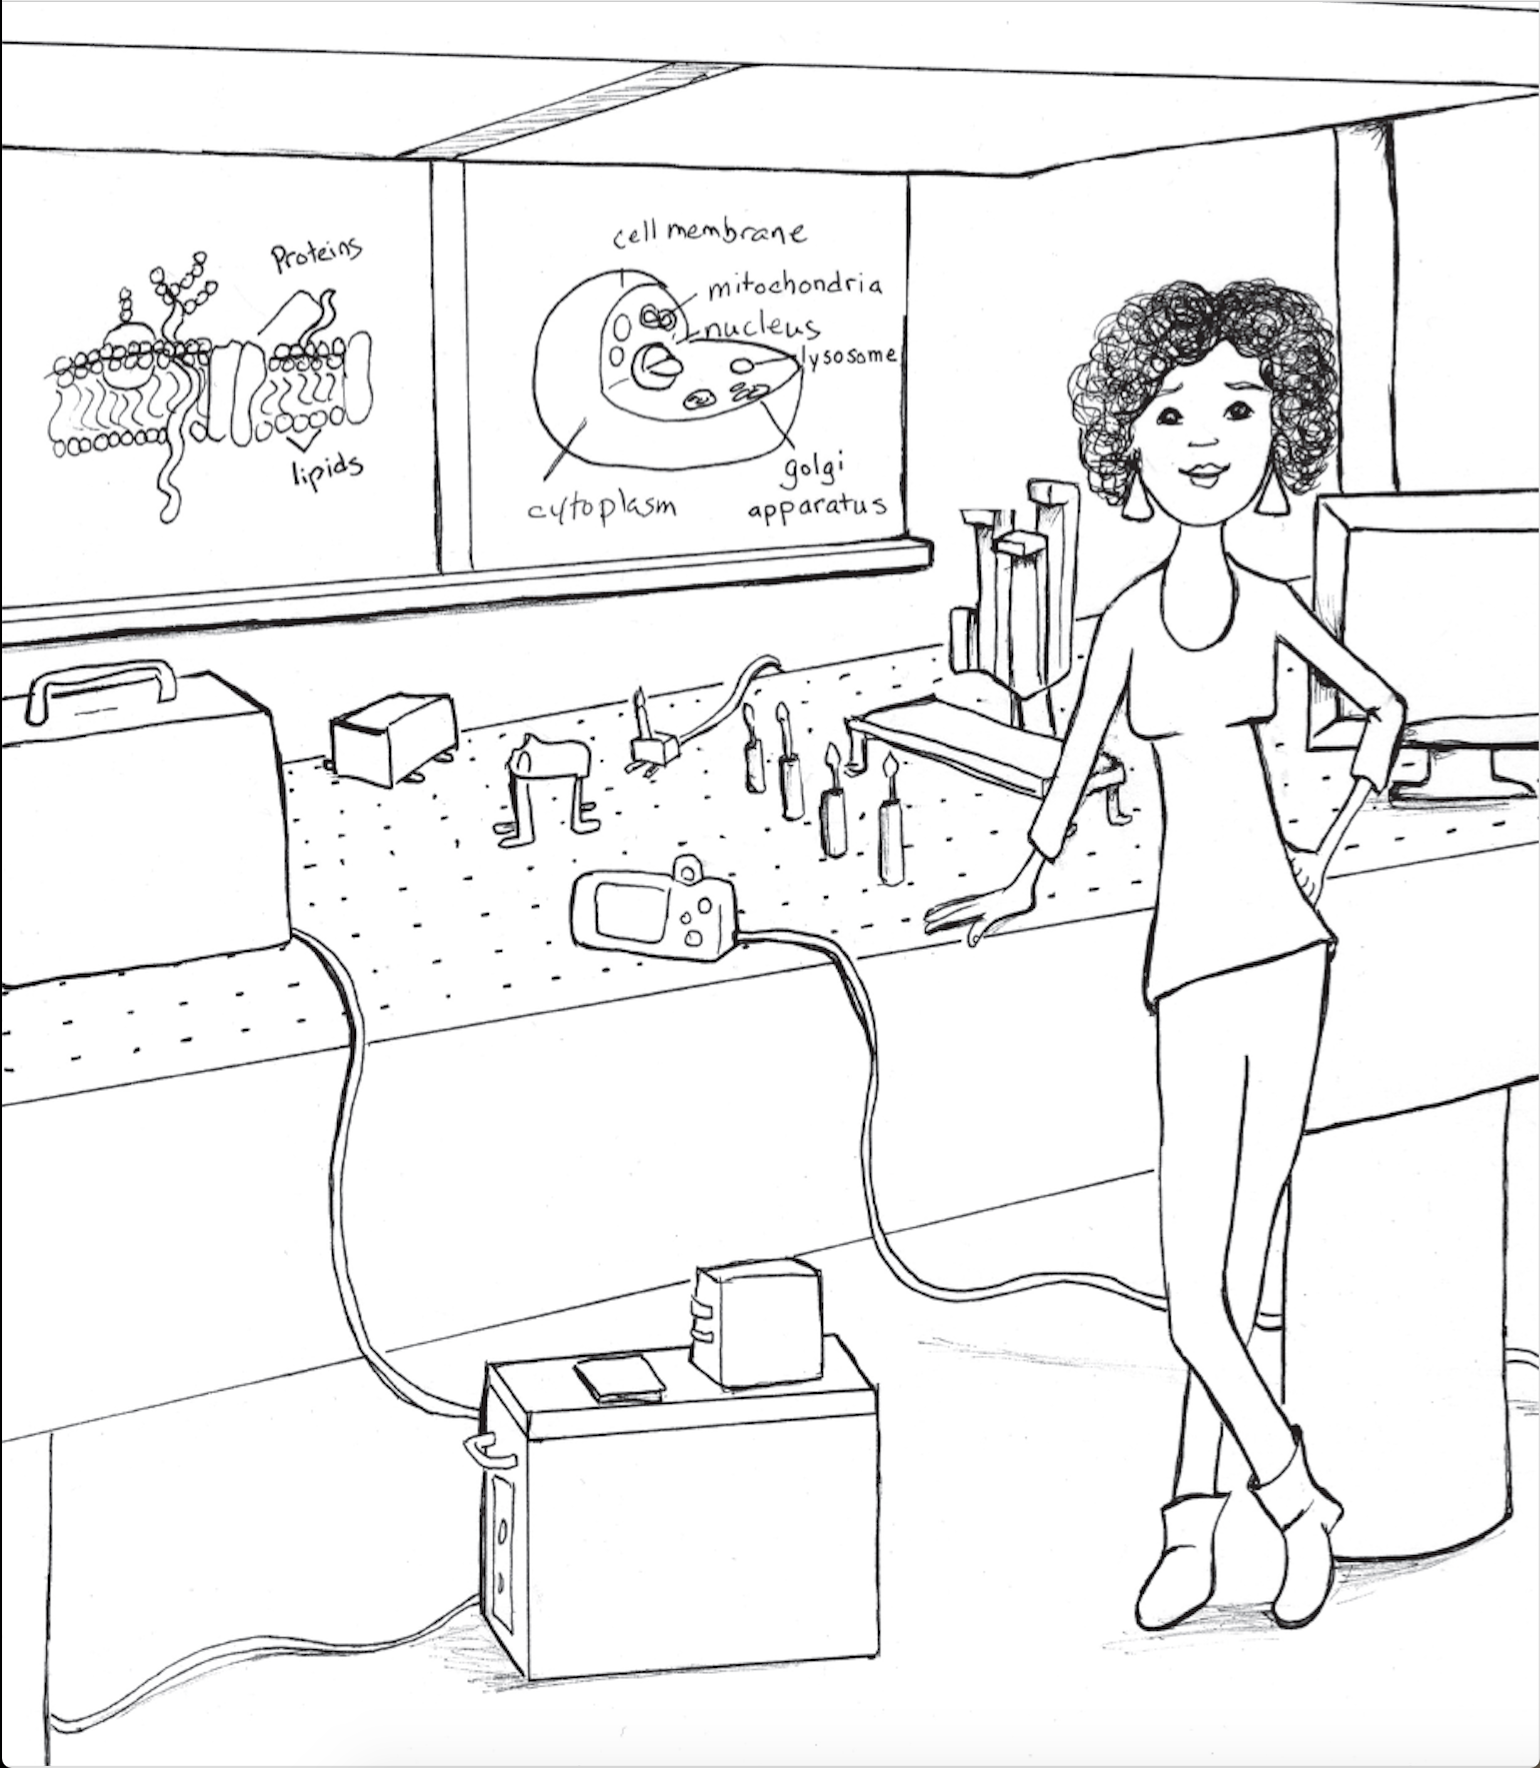 LaNell Williams '15, who studied physics at Wesleyan, is one of 22 women in science and technology careers featured in a new coloring book by Sara MacSorley.